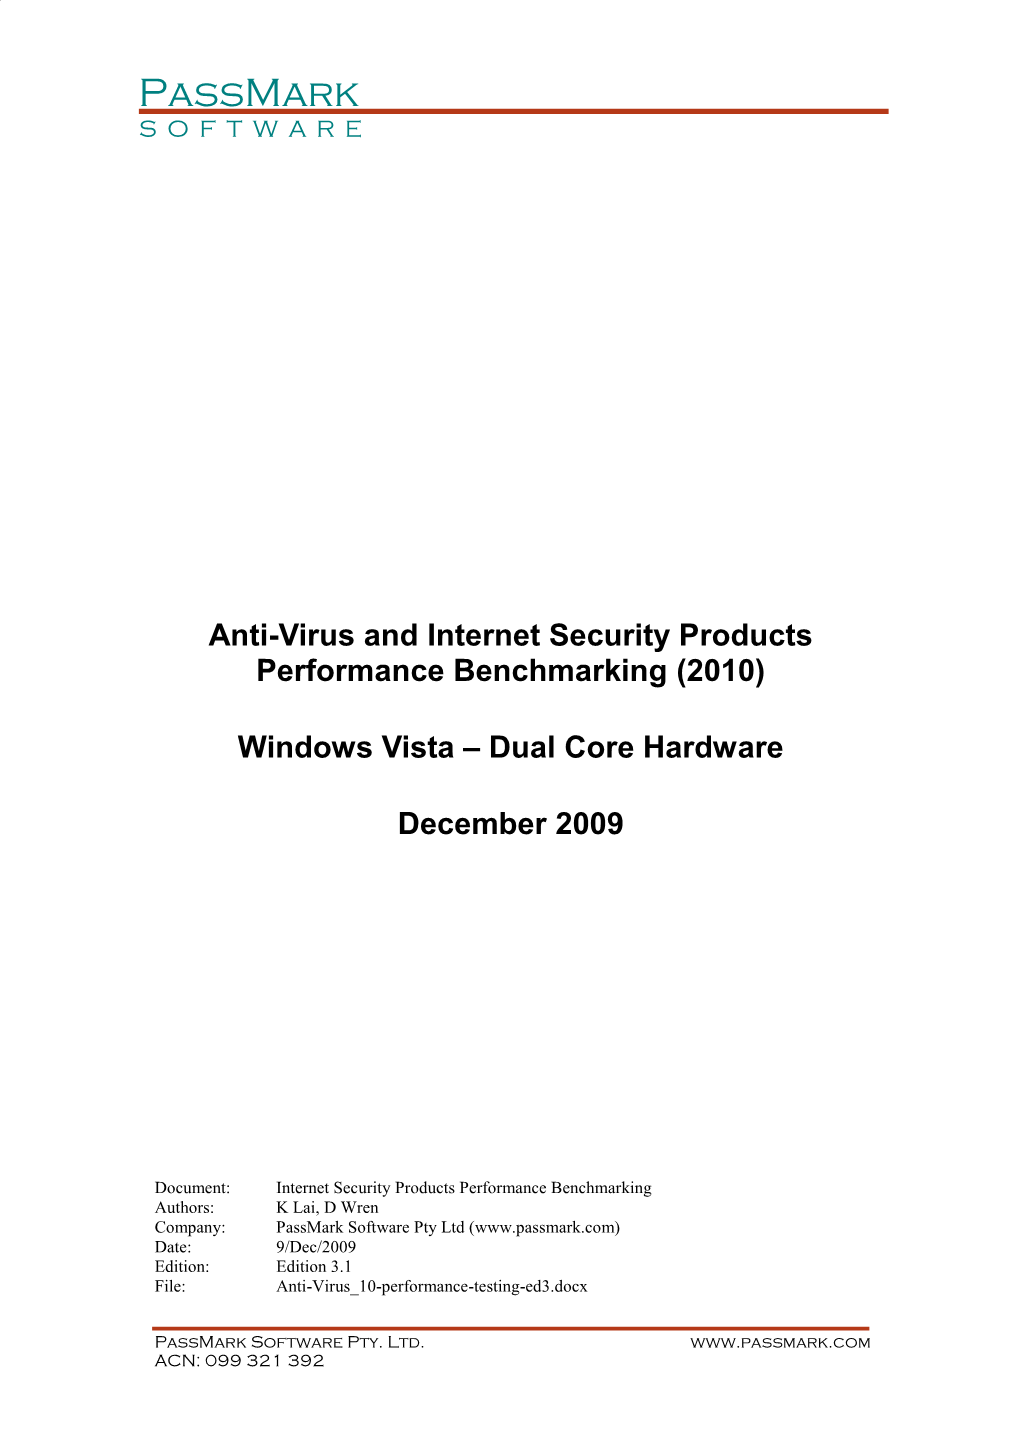 Anti-Virus and Internet Security Products Performance Benchmarking (2010)